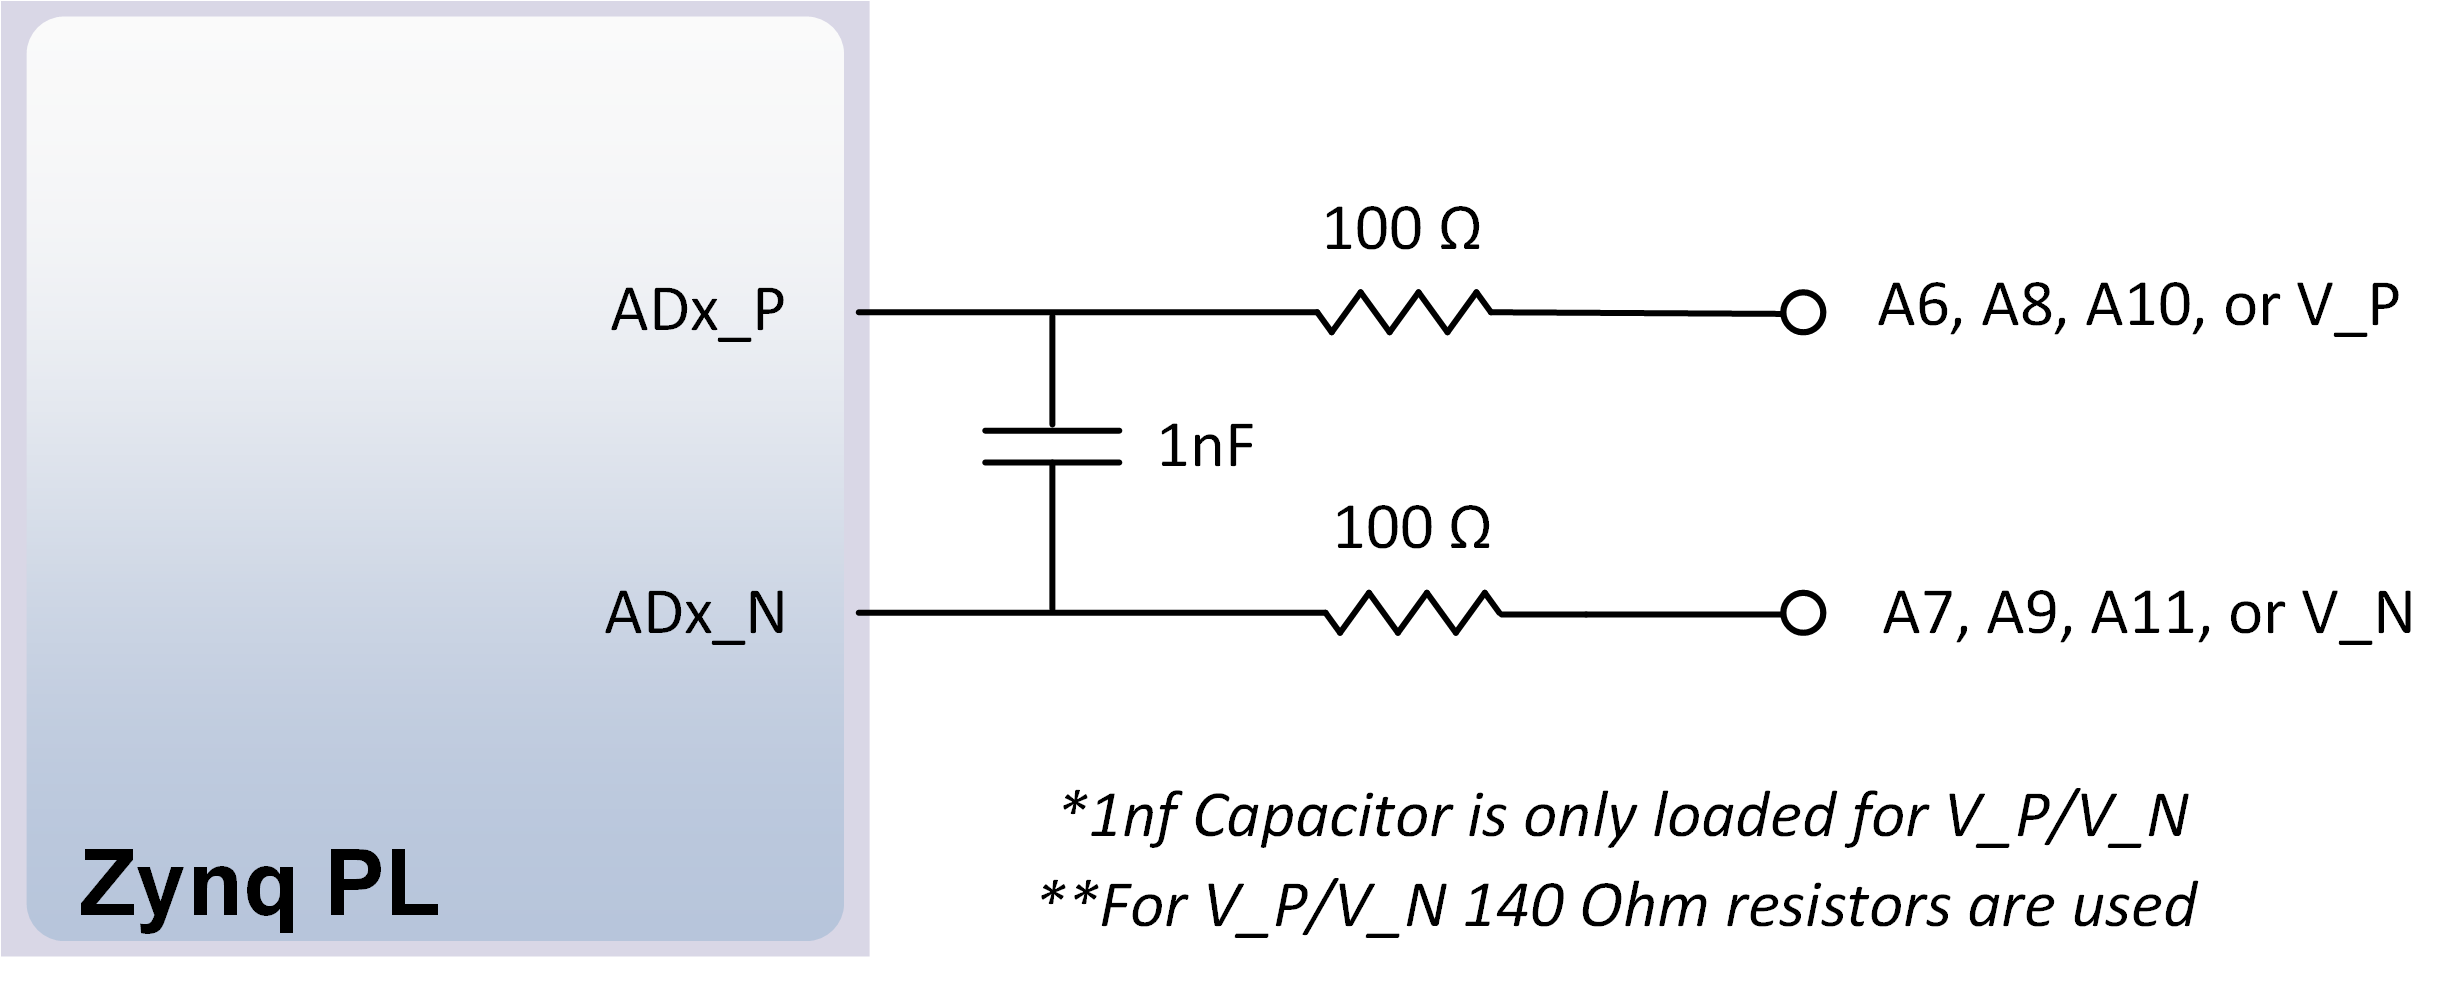 Figure 17.2.2. Differential Analog Inputs